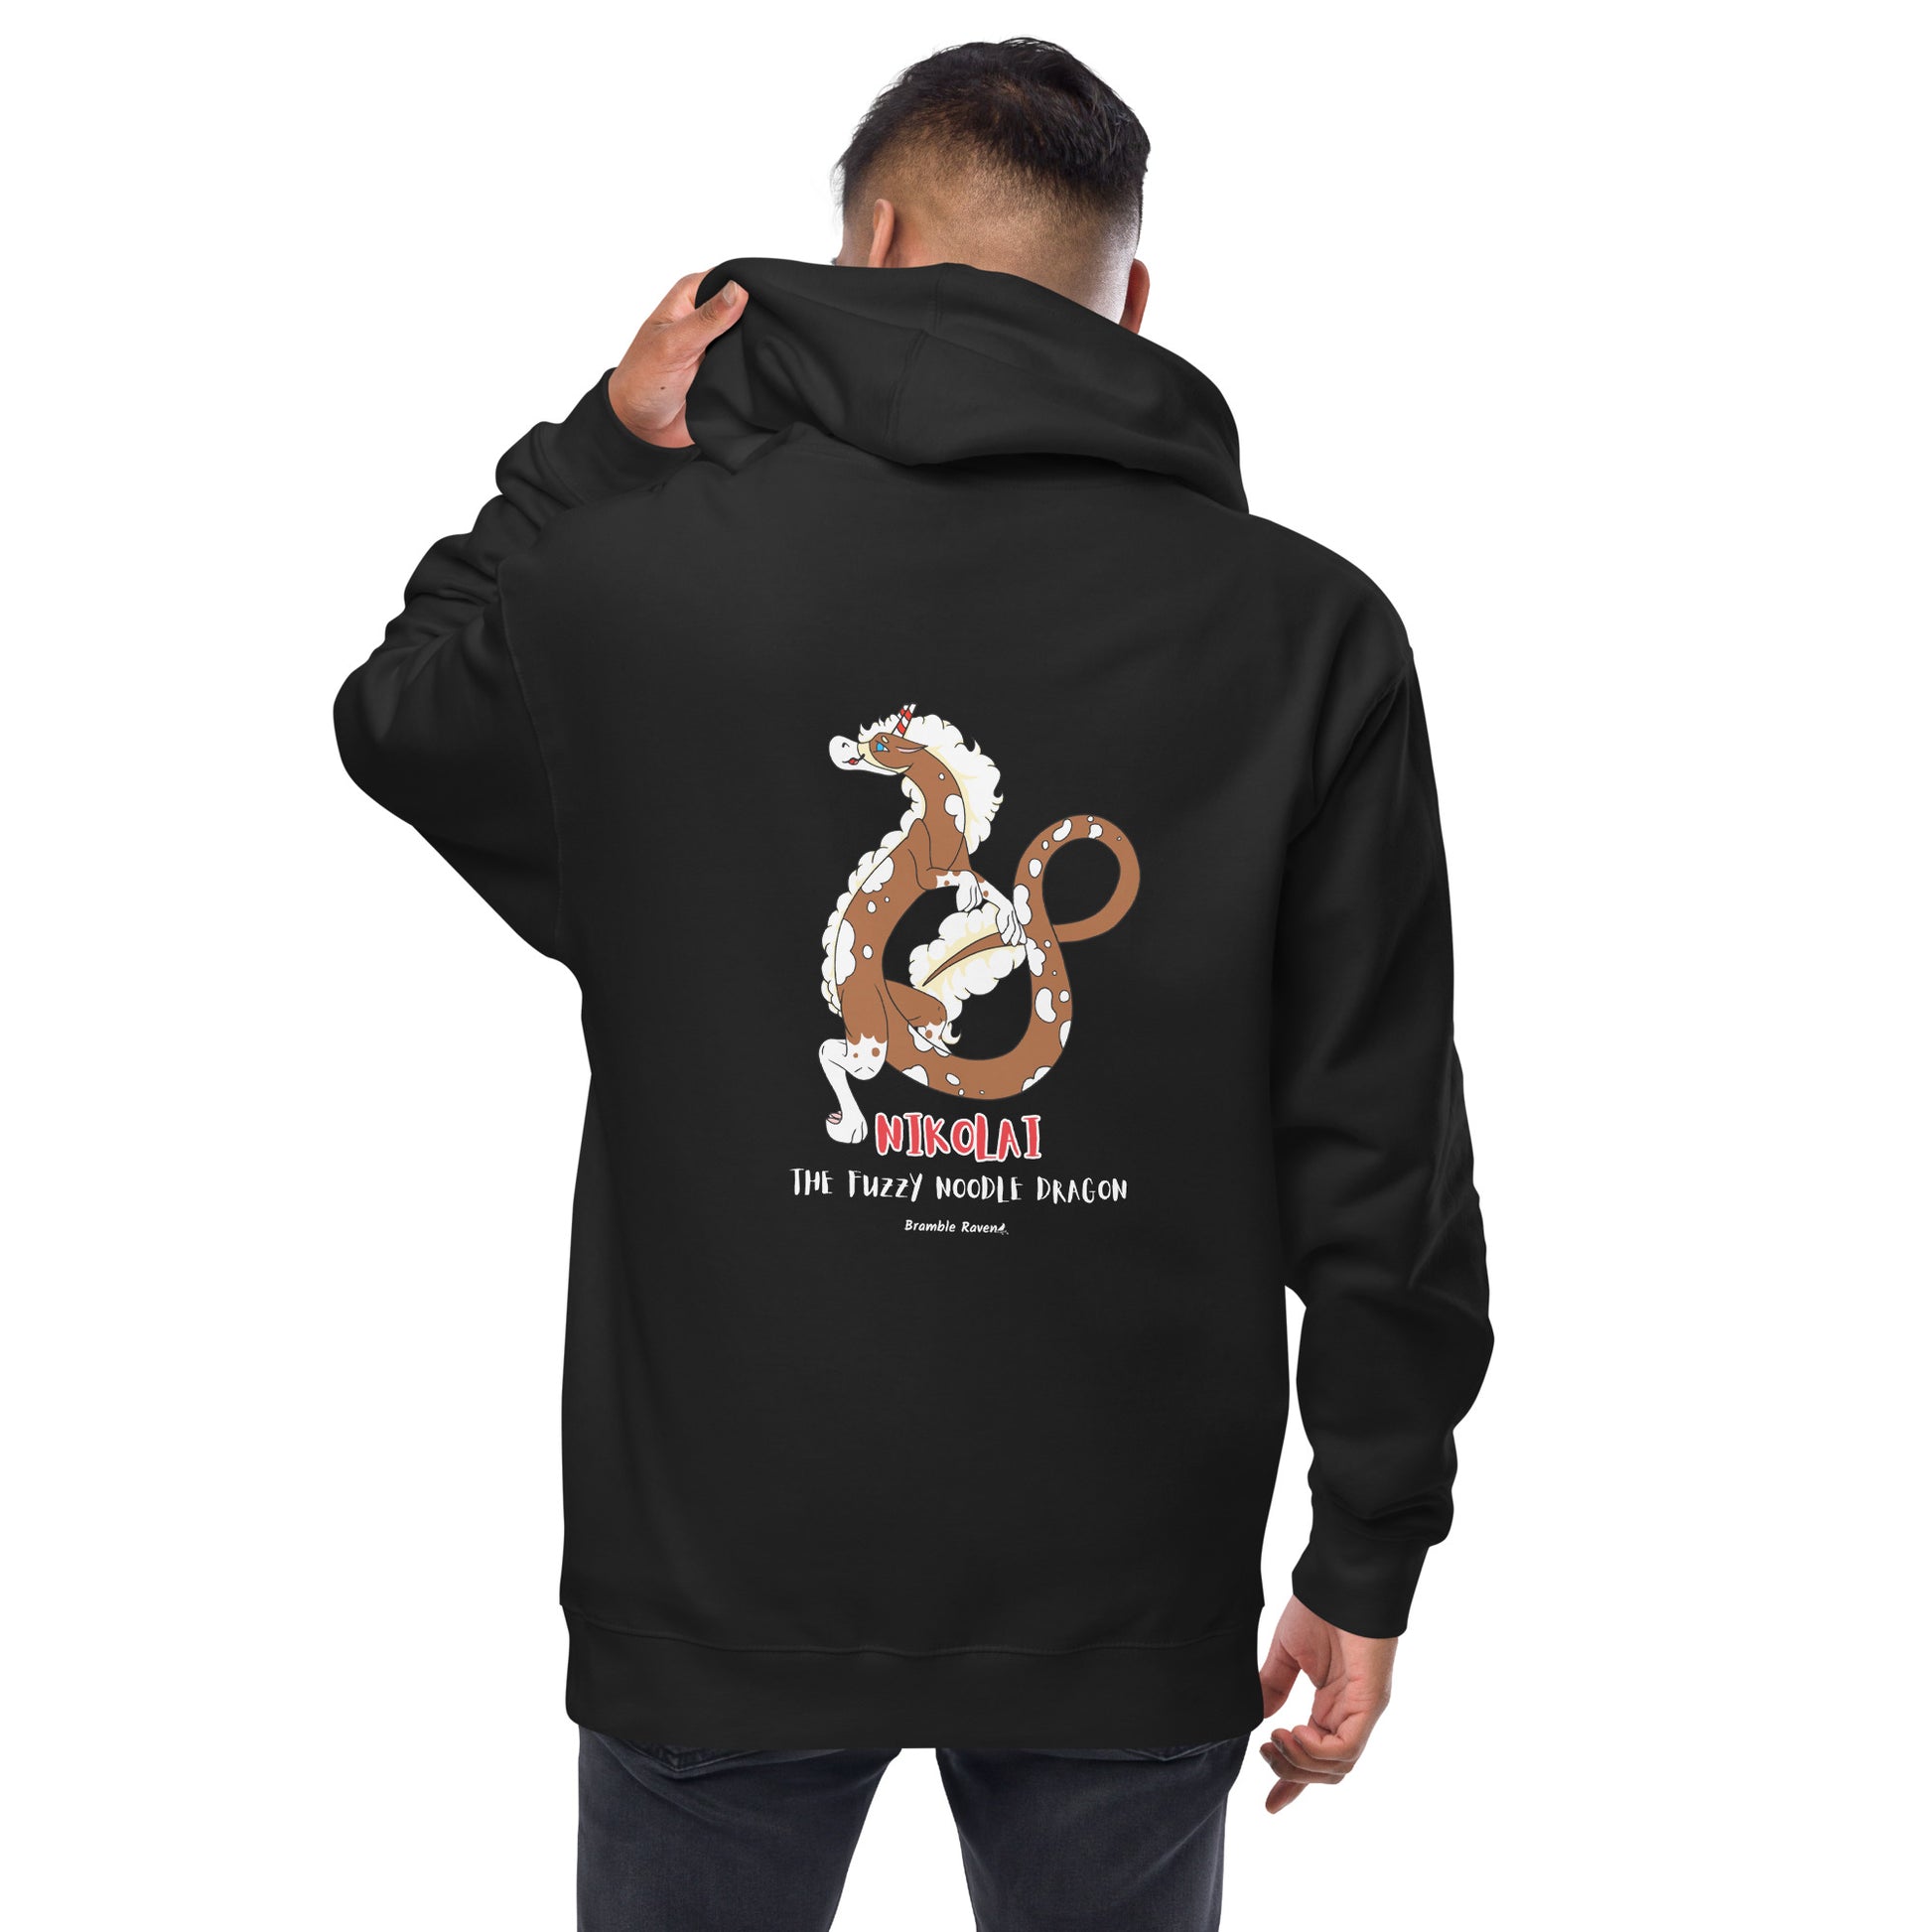 Black colored unisex fleece zip-up hoodie. Features a back design of Nikolai the root beer float fuzzy noodle dragon. Back view shown on male model.